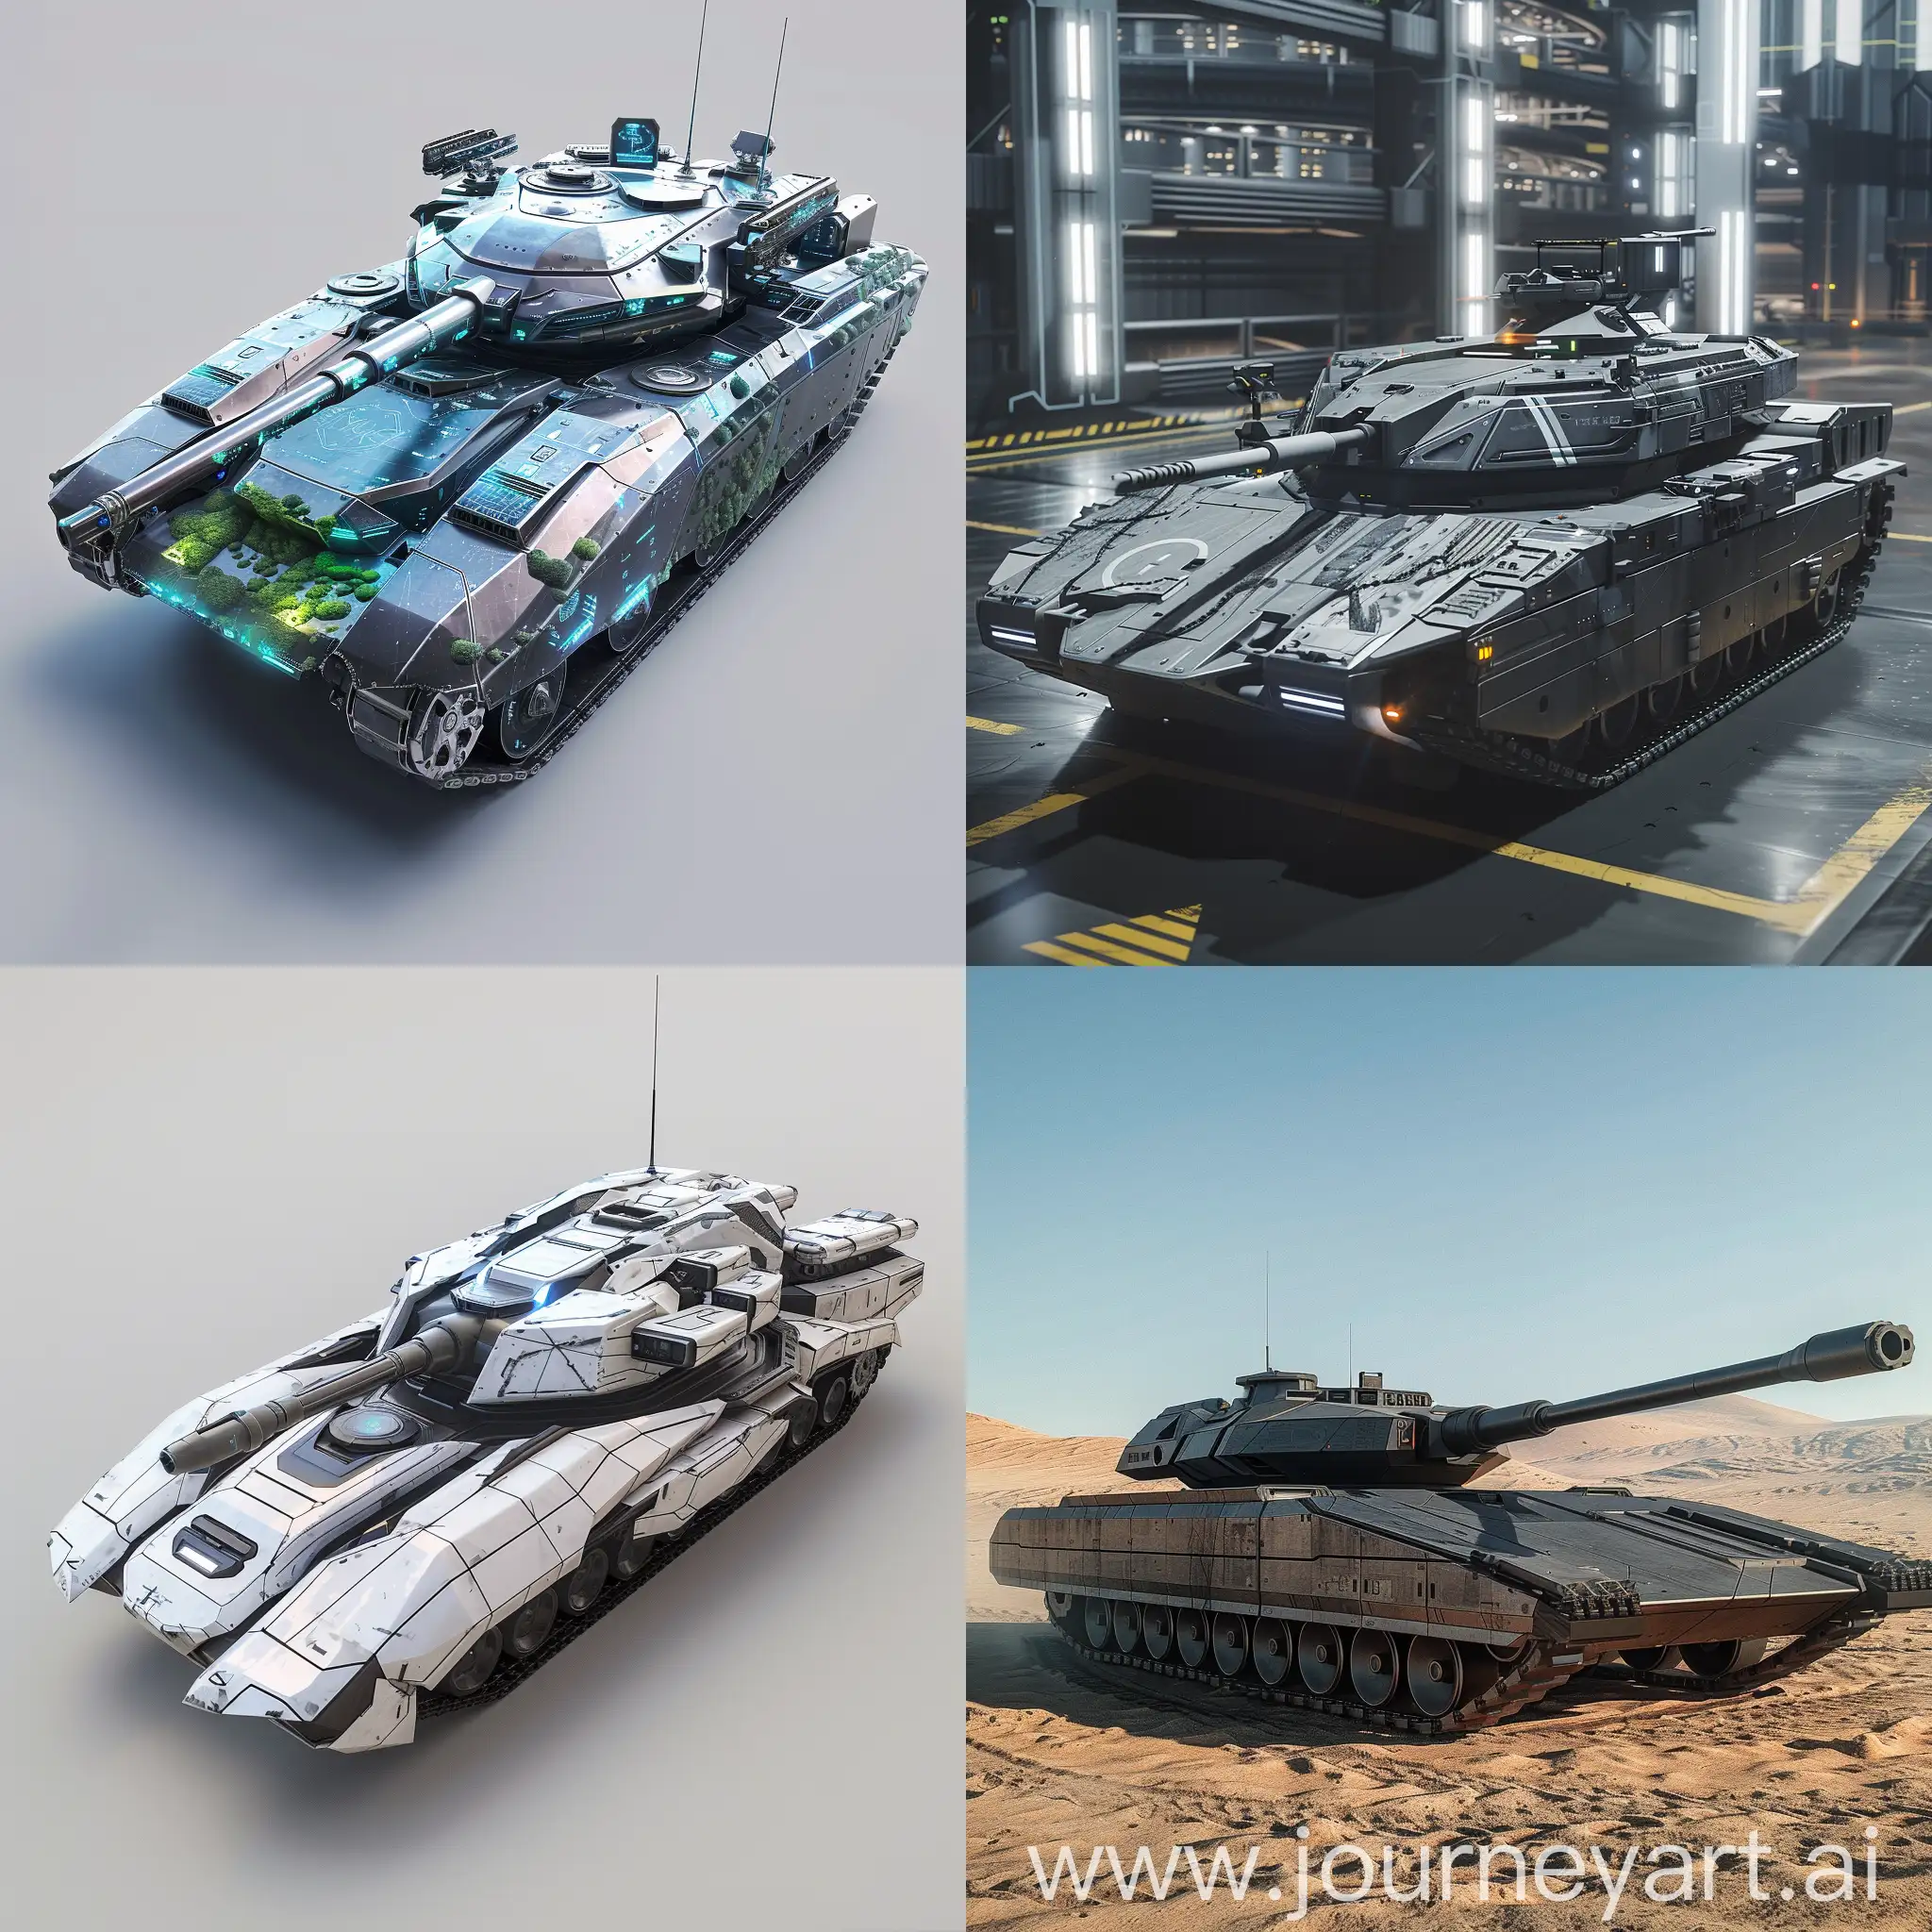 Futuristic tank, in futuristic style, Advanced Armor Materials, Modular Architecture, Electrothermal Chemical Propulsion, Integrated Energy Systems, Autonomous Systems, Electromagnetic Armor Regeneration, Directed Energy Weapons, Active Protection Systems, Adaptive Camouflage, Biometric Crew Interface, Stealth Coating, Active Defense Systems, Multifunctional Armor, Adaptive Suspension Systems, Integrated Sensor Suite, Modular Weapon Mounts, Active Camouflage Systems, Unmanned Aerial Vehicle (UAV) Launch/Recovery Systems, Environmental Control Systems, Advanced Communication Antennas, Solar Panel Arrays, Kinetic Energy Harvesting Systems, Thermal Electric Generators (TEGs), Wind Turbines, Regenerative Braking Systems, Hydrogen Fuel Cells, Biofuel Generators, Piezoelectric Materials, Algae Bioreactors, Thermoelectric Cooling Systems, Solar Concentrators, Wind Turbine Arrays, Hydrodynamic Turbines, Piezoelectric Armor Panels, Algae Bioreactor Facades, Thermal Energy Harvesters, Kinetic Energy Recovery Systems (KERS), Biomimetic Energy Harvesting Structures, Electrodynamic Tethers, Thermoacoustic Generators, unreal engine 5 --stylize 1000